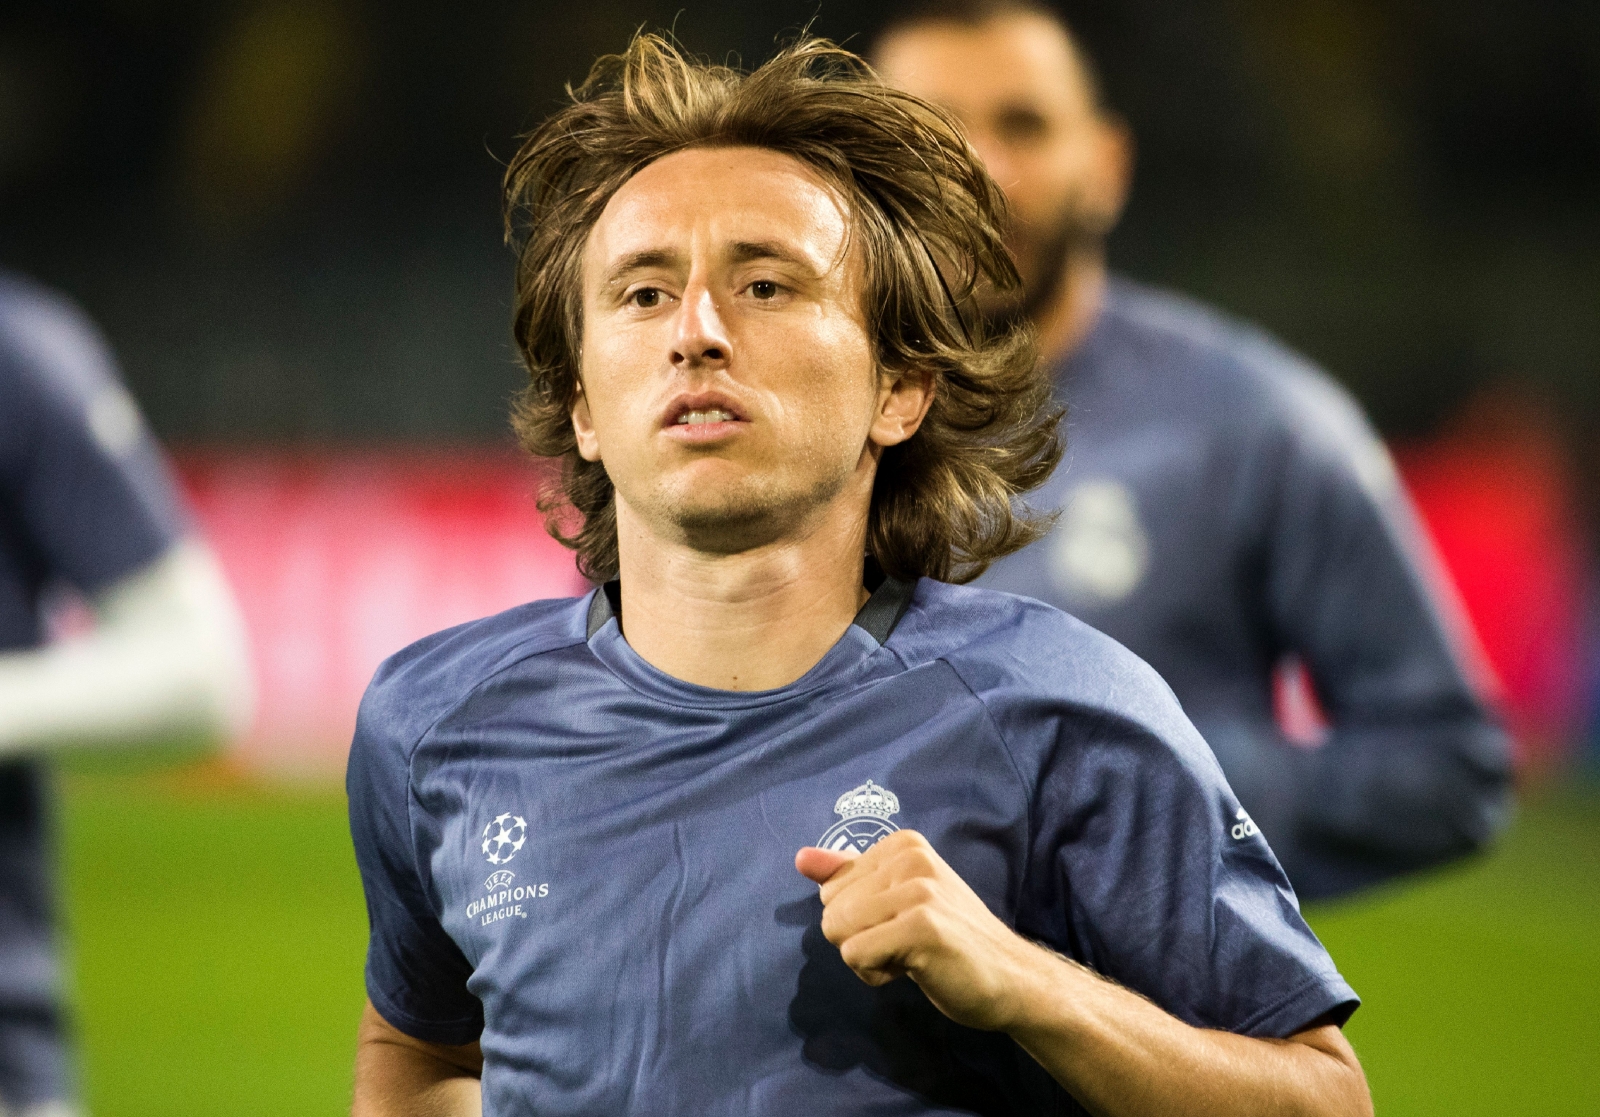 Manchester United transfer news: Real Madrid star Luka Modric could replace Paul Scholes